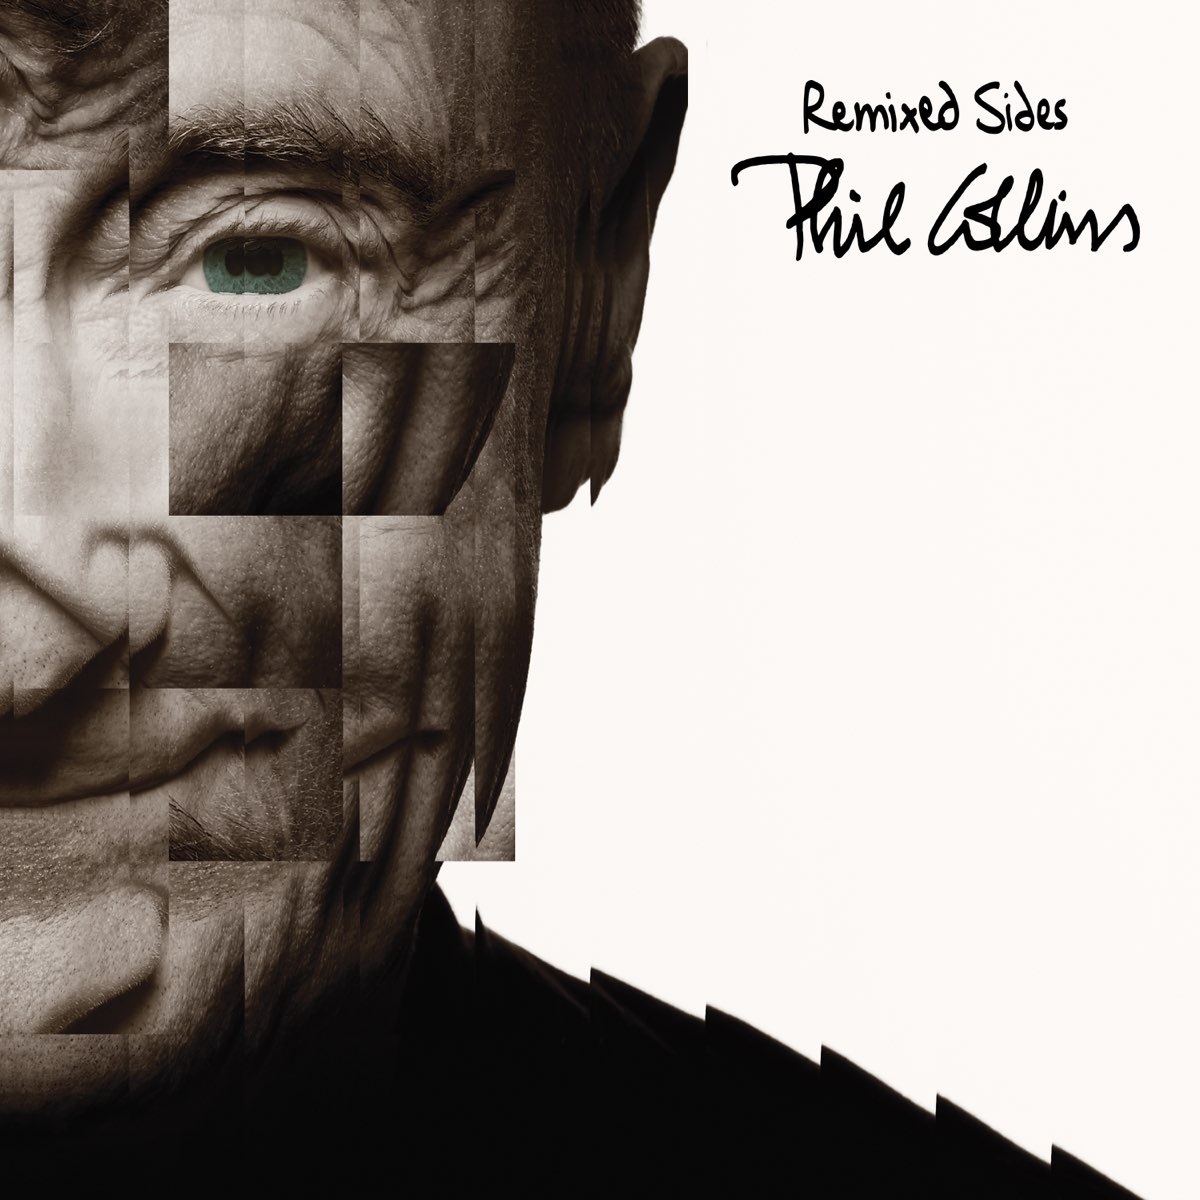 Remixed Sides by Phil Collins on Apple Music